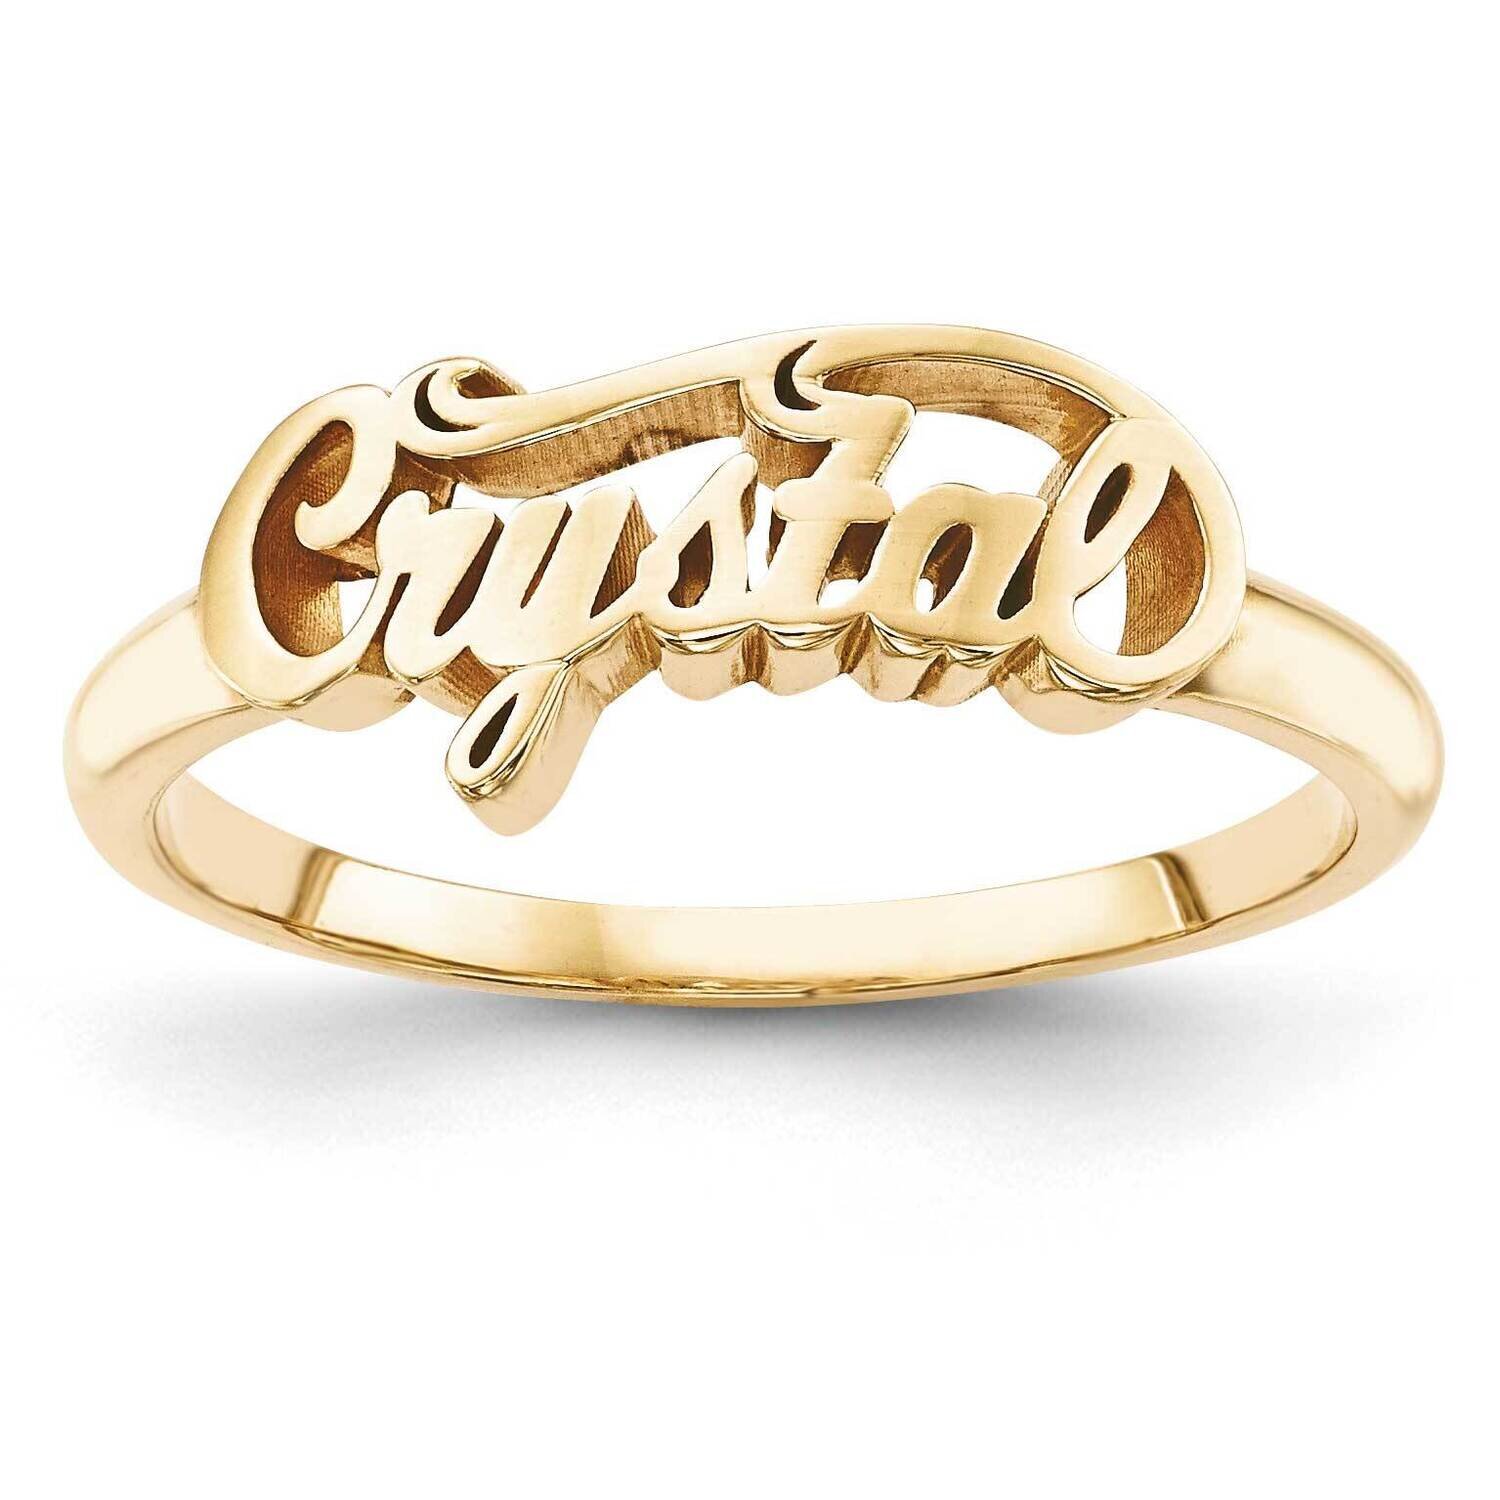 Casted High Polish Name Ring Gold-plated Silver XNR58GP